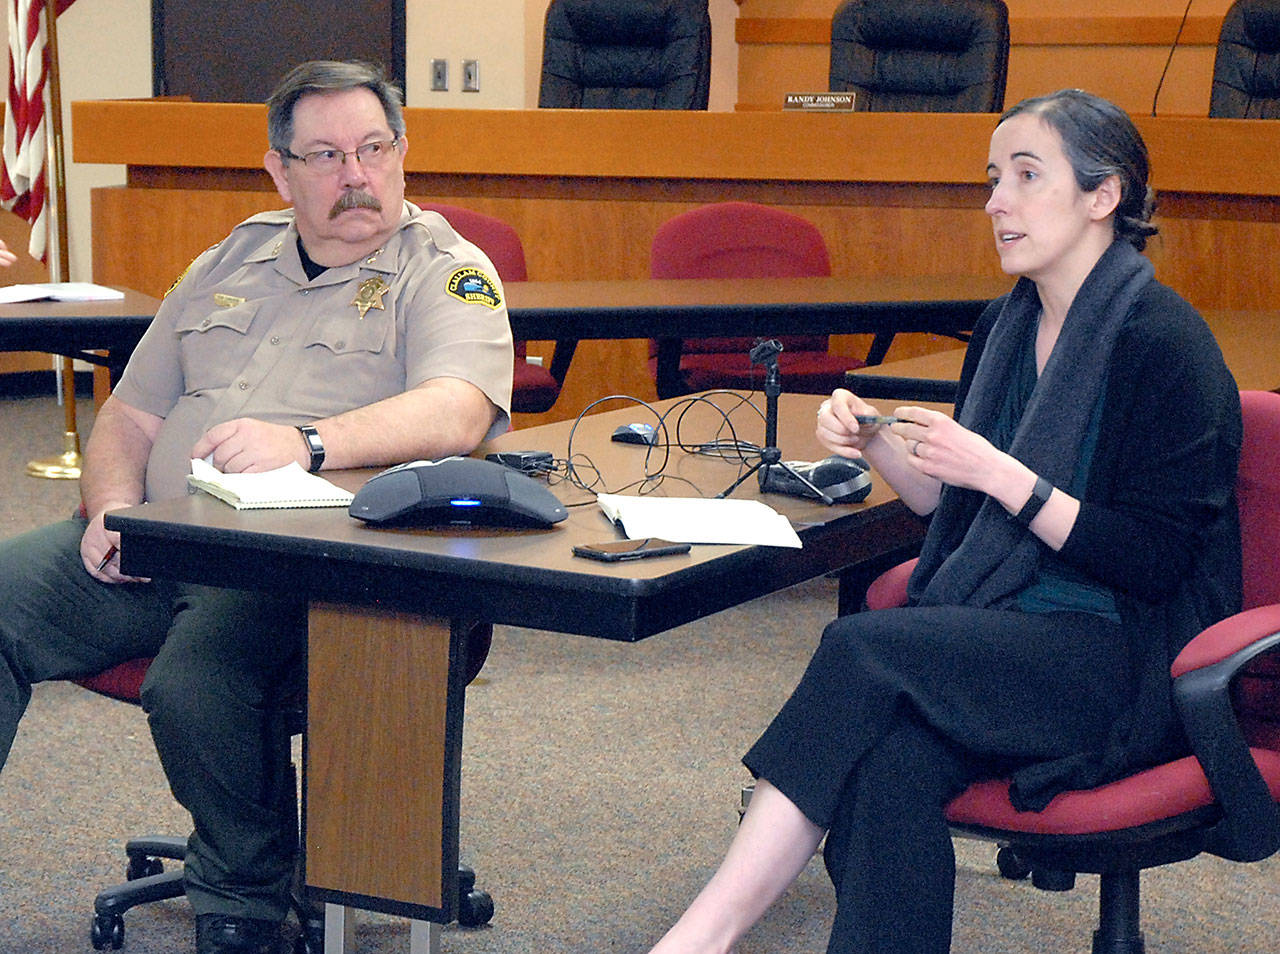 Dr. Allison Berry Unthank, Clallam County public health officer, right, provides an update on the novel coronavirus as Clallam County Undersheriff Ron Cameron listens in Tuesday, March 17, at the Clallam County Courthouse in Port Angeles. Photo by Keith Thorpe/Olympic Peninsula News Group